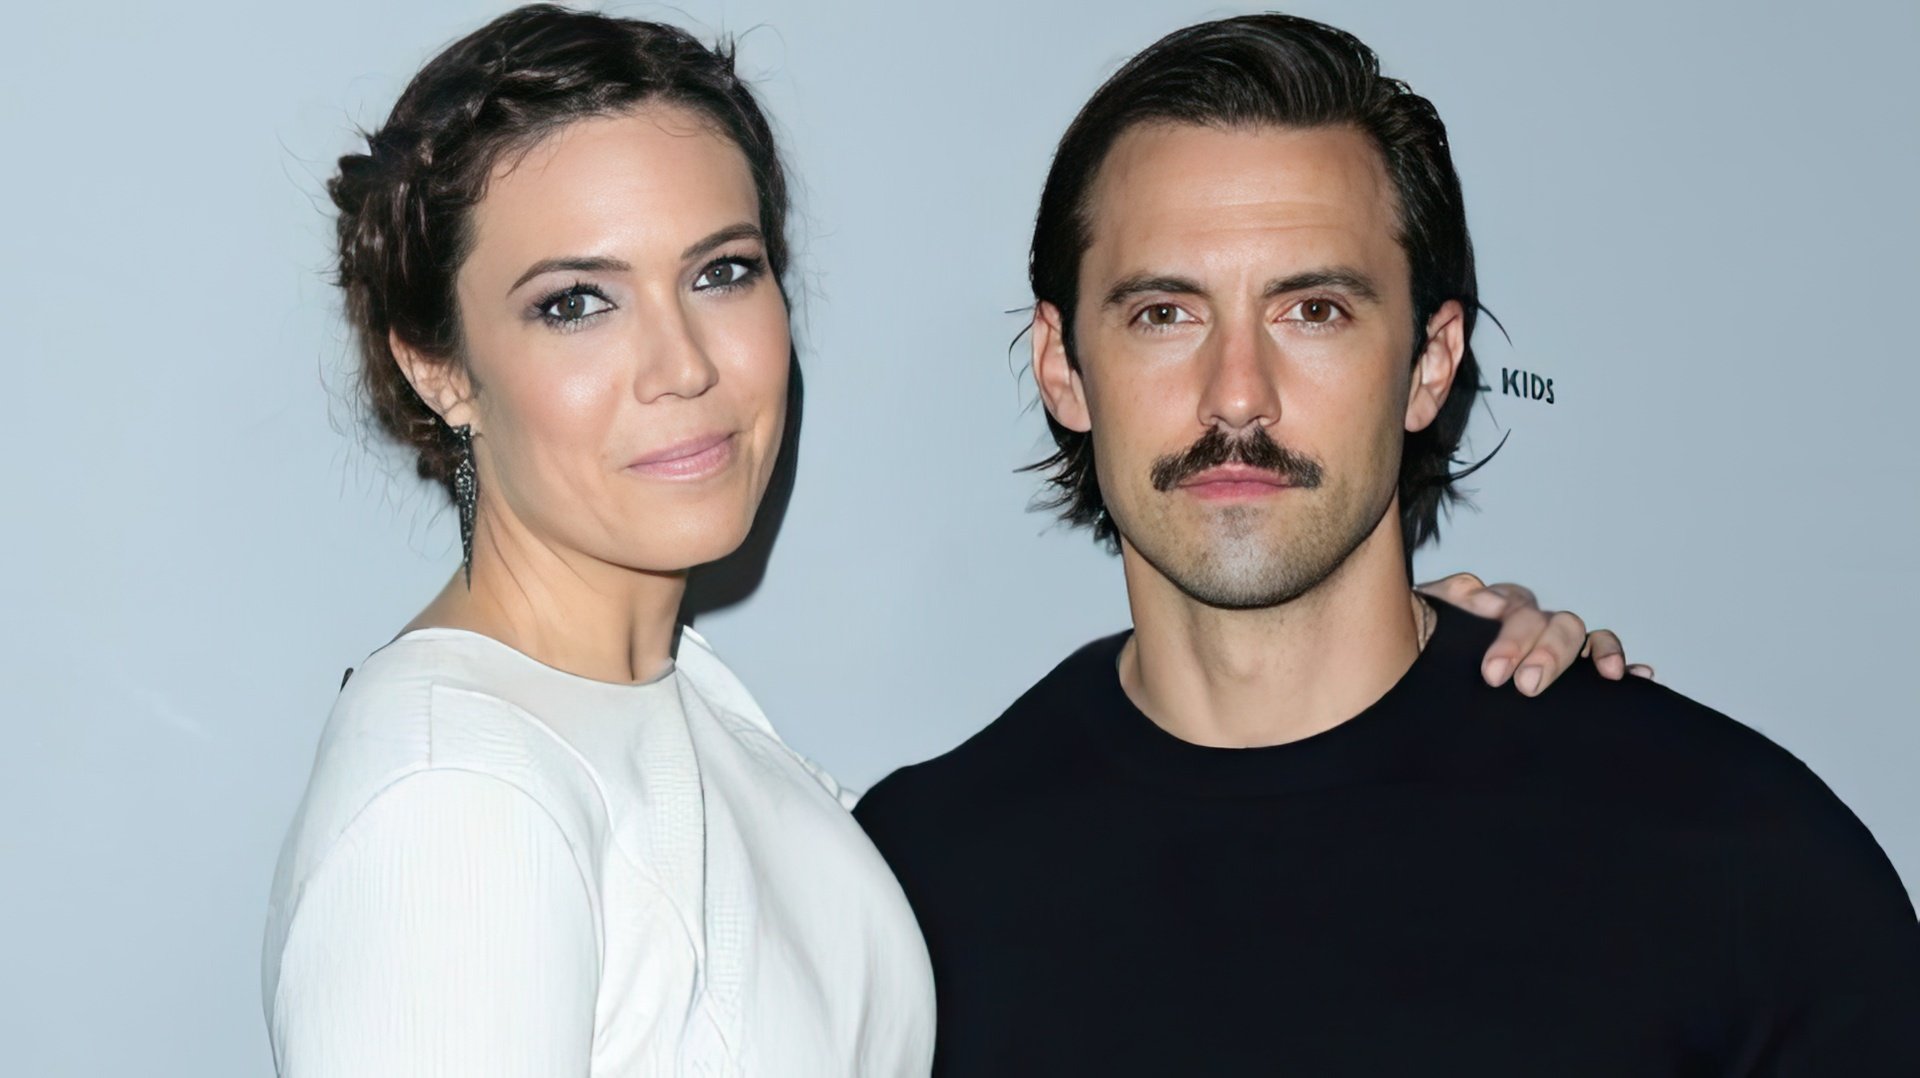 Milo Ventimiglia and Mandy Moore as Spouses in the TV Series This Is Us